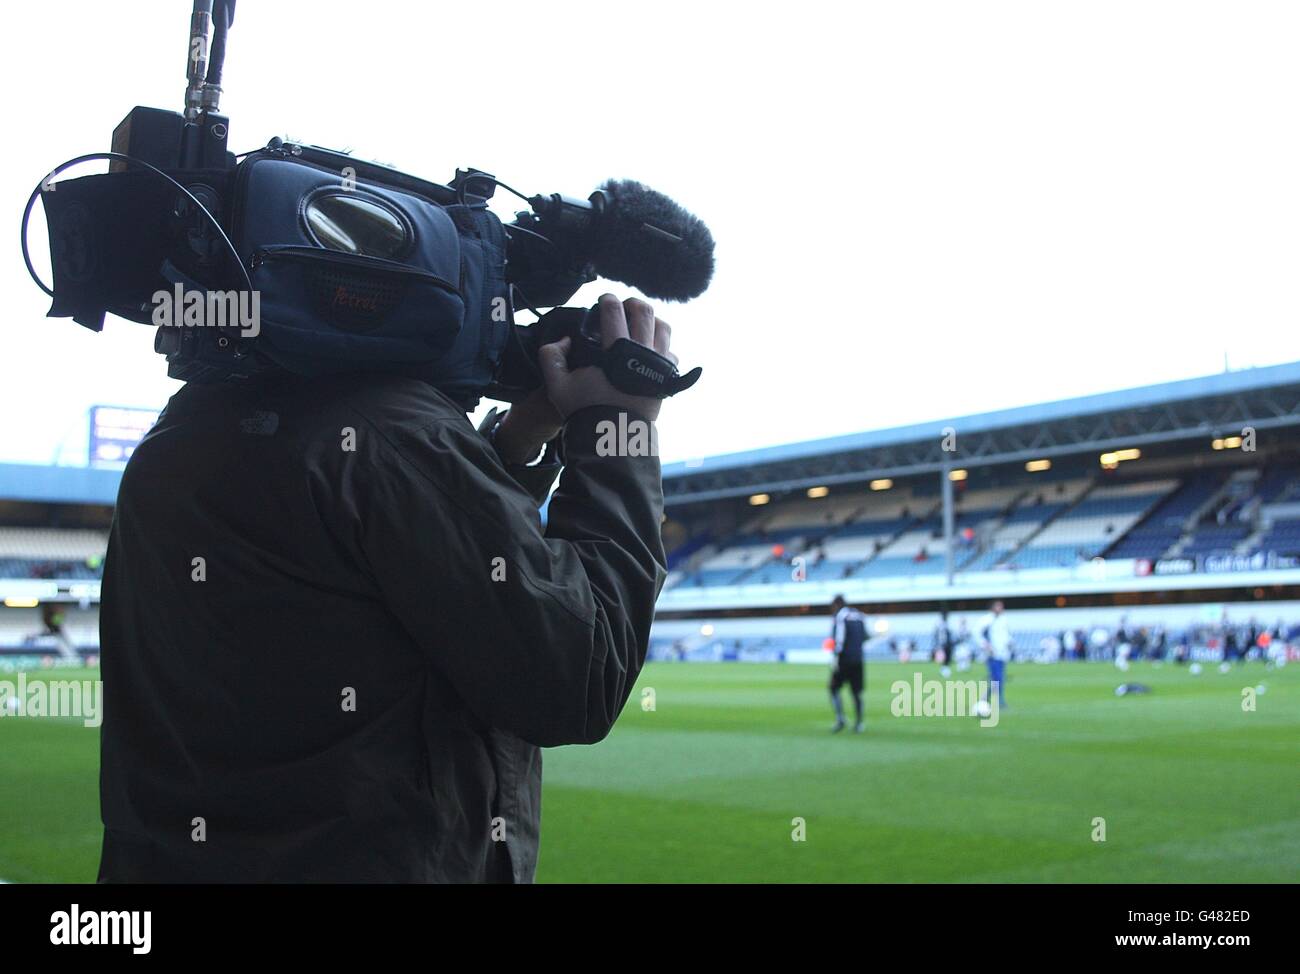 Soccer - npower Football League Championship - Queens Park Rangers v Sheffield United - Loftus Road. A Cameraman films the match action Stock Photo